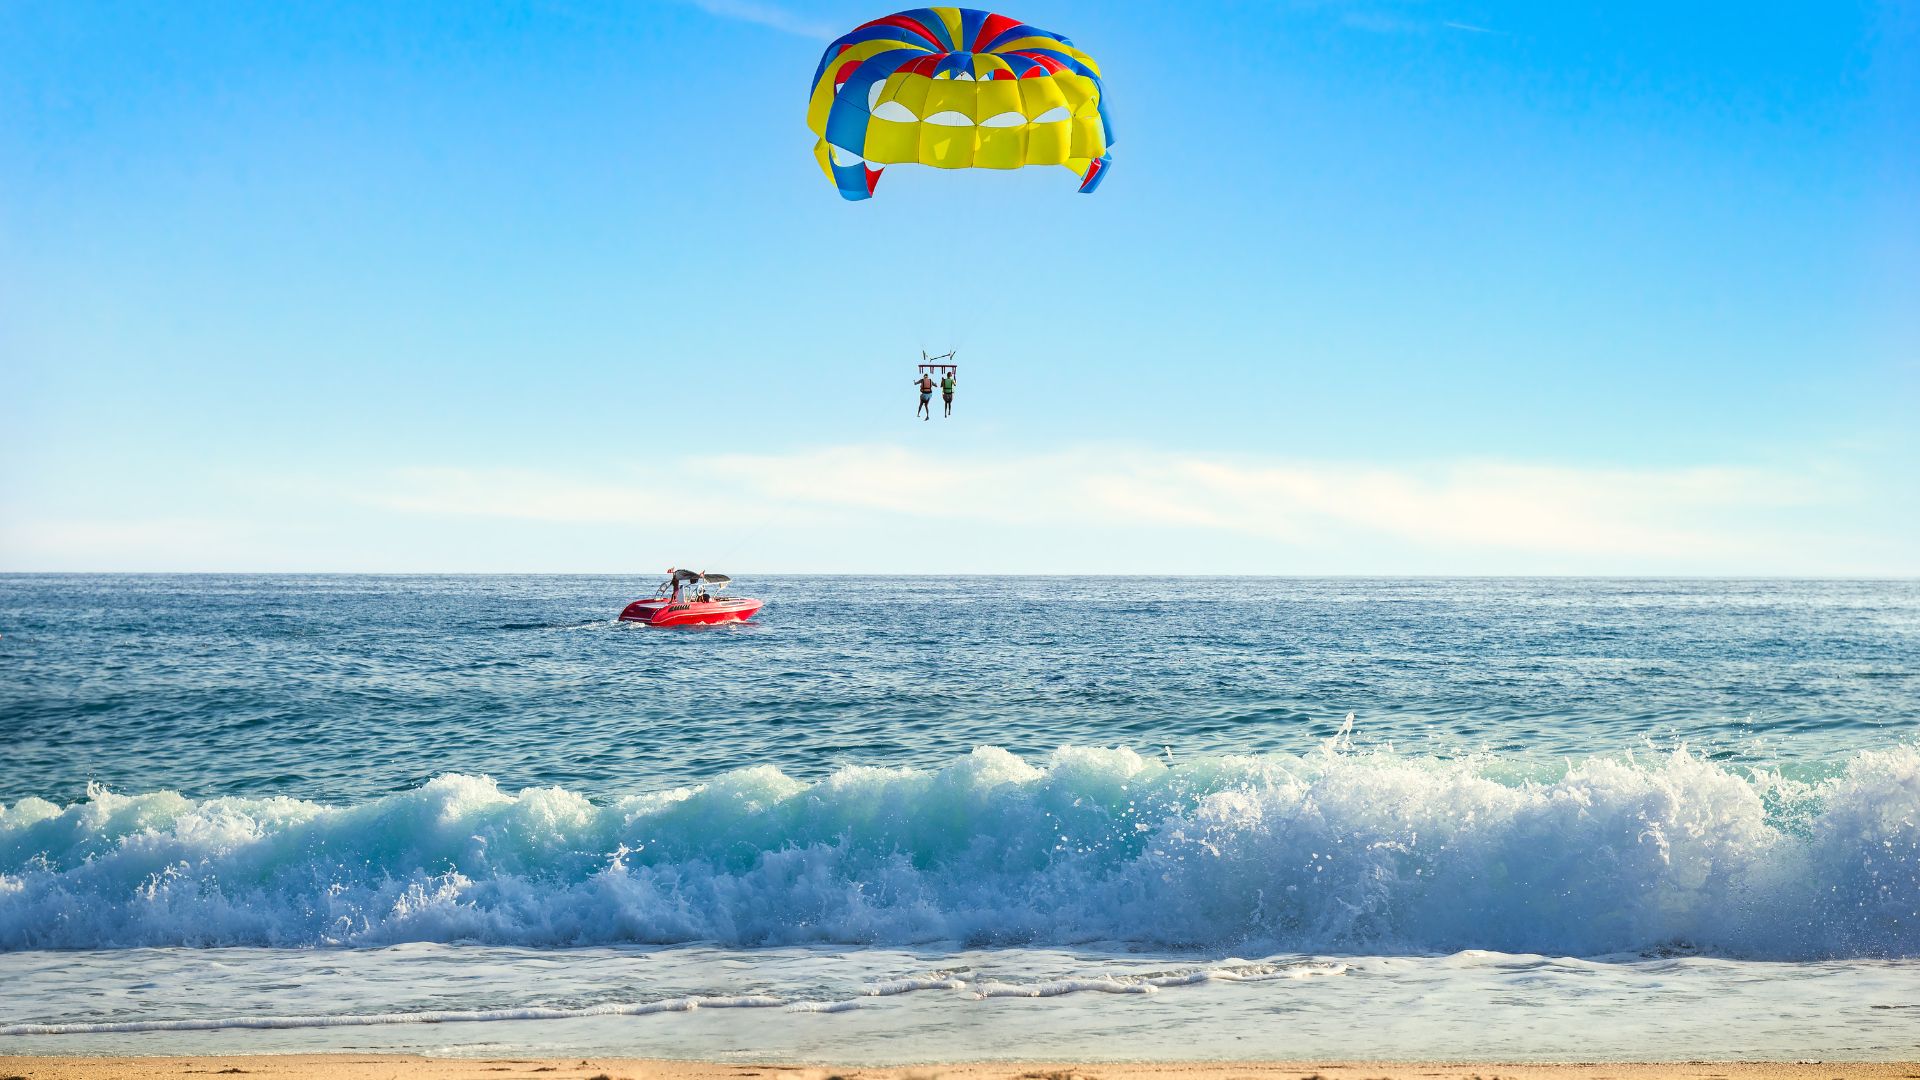 Two people are in the air on a parasail, pulled by a red boat close to the ocean shore.